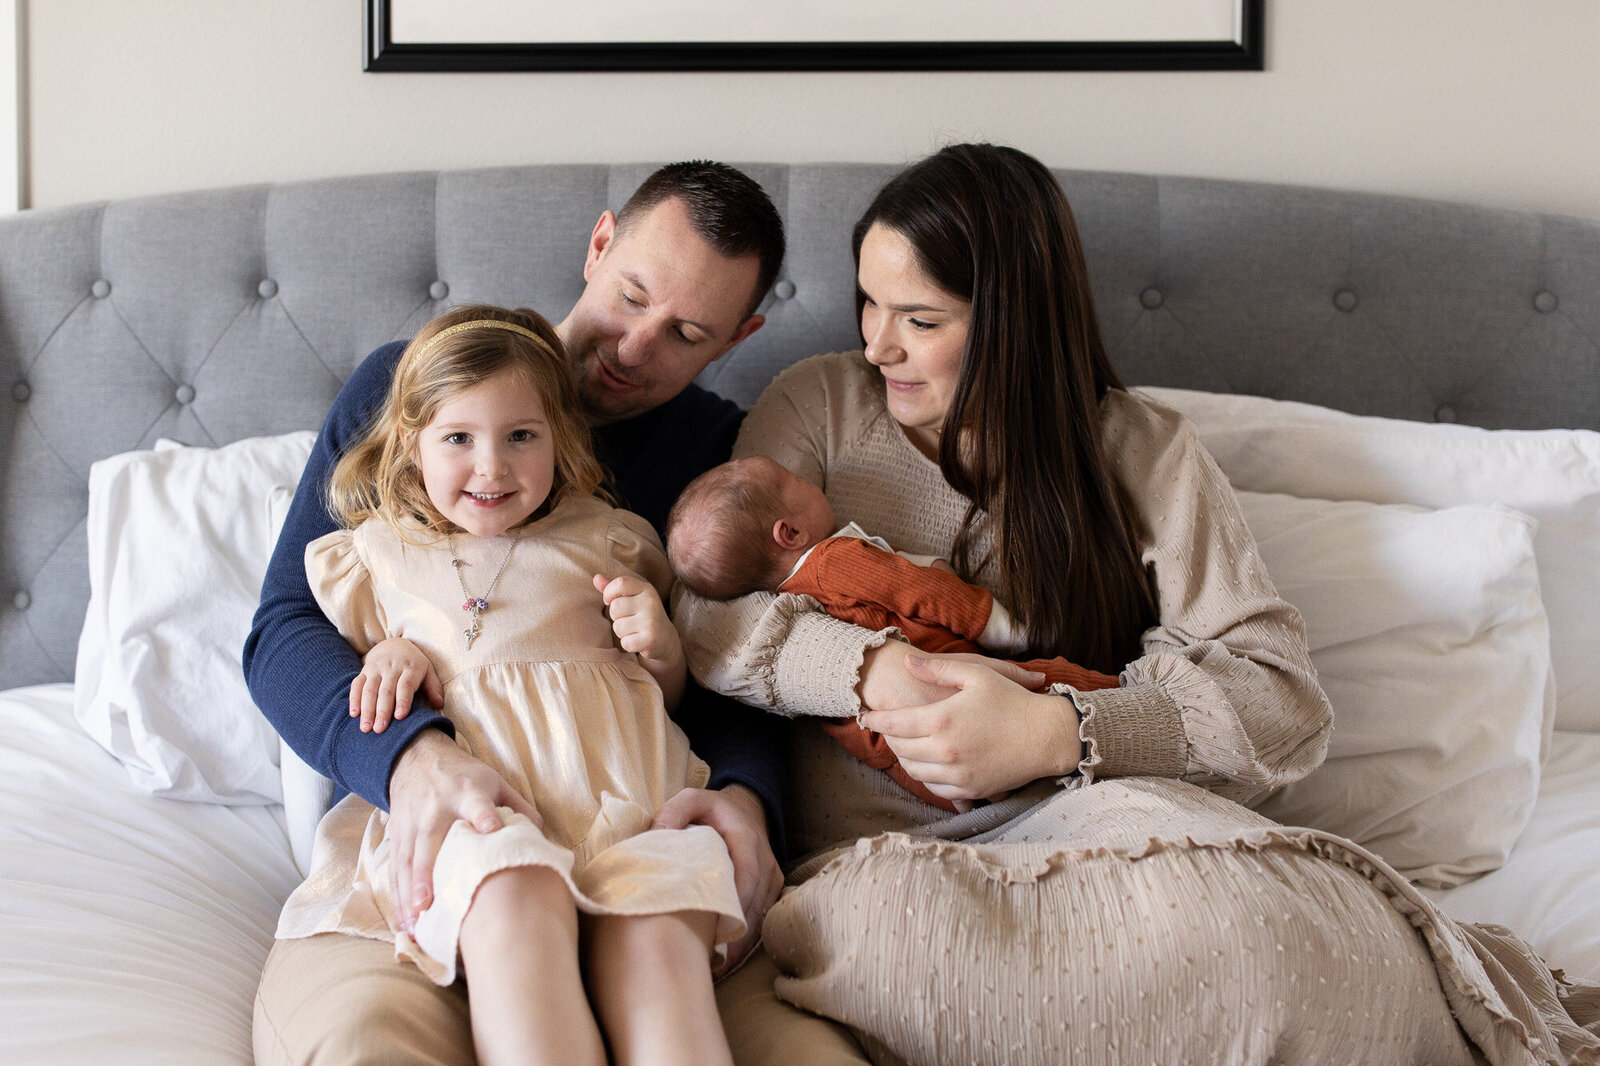 Family sitting on bed hugging with newborn in moms arms.